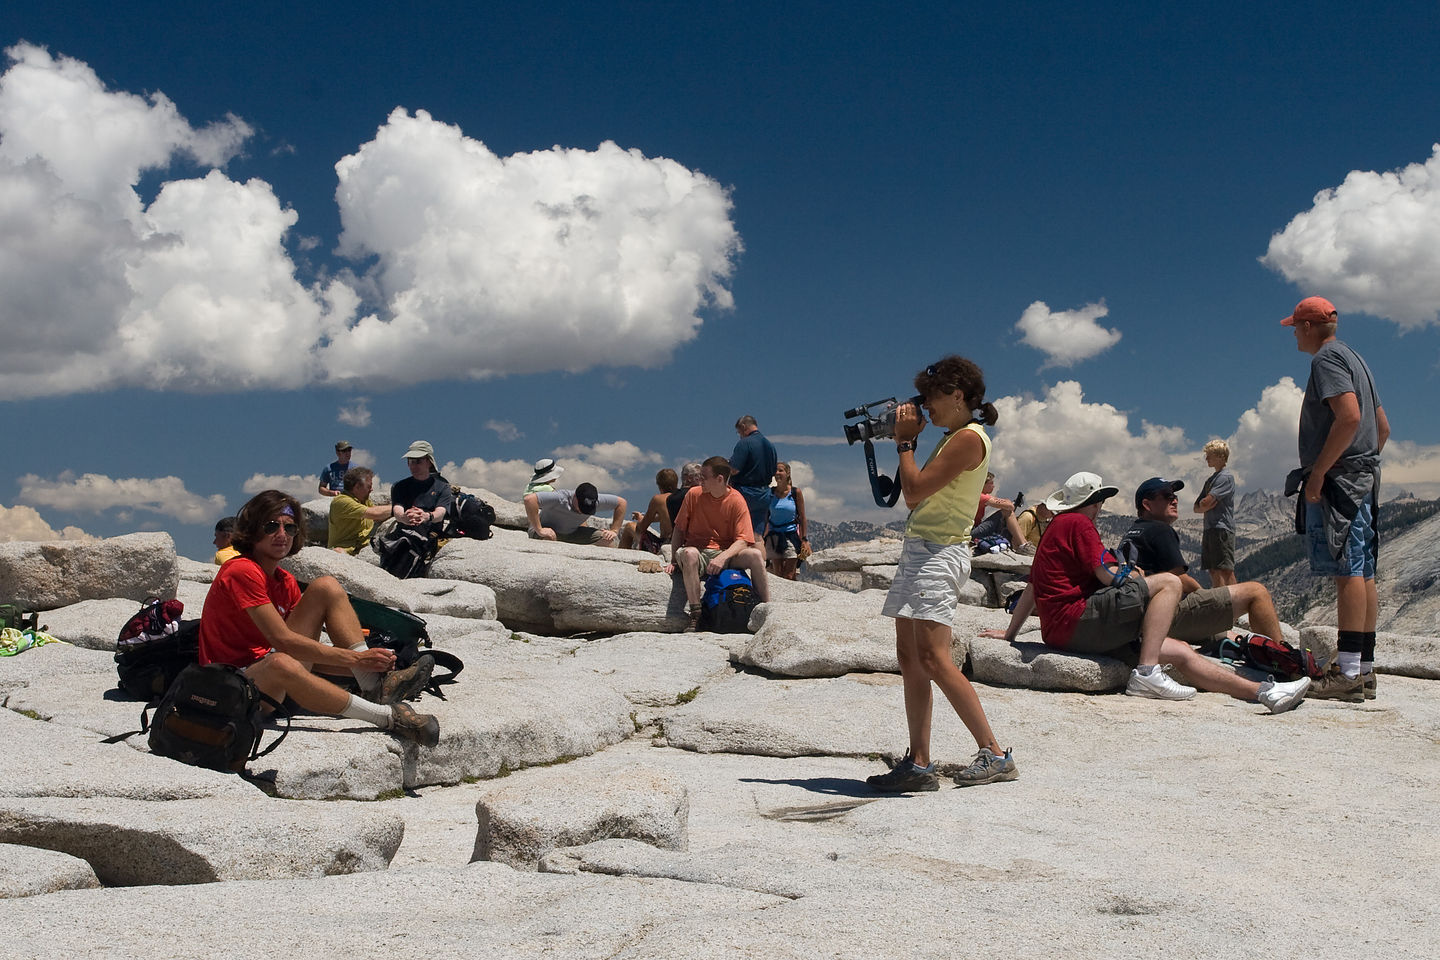 Lolo videotaping on Half Dome summit